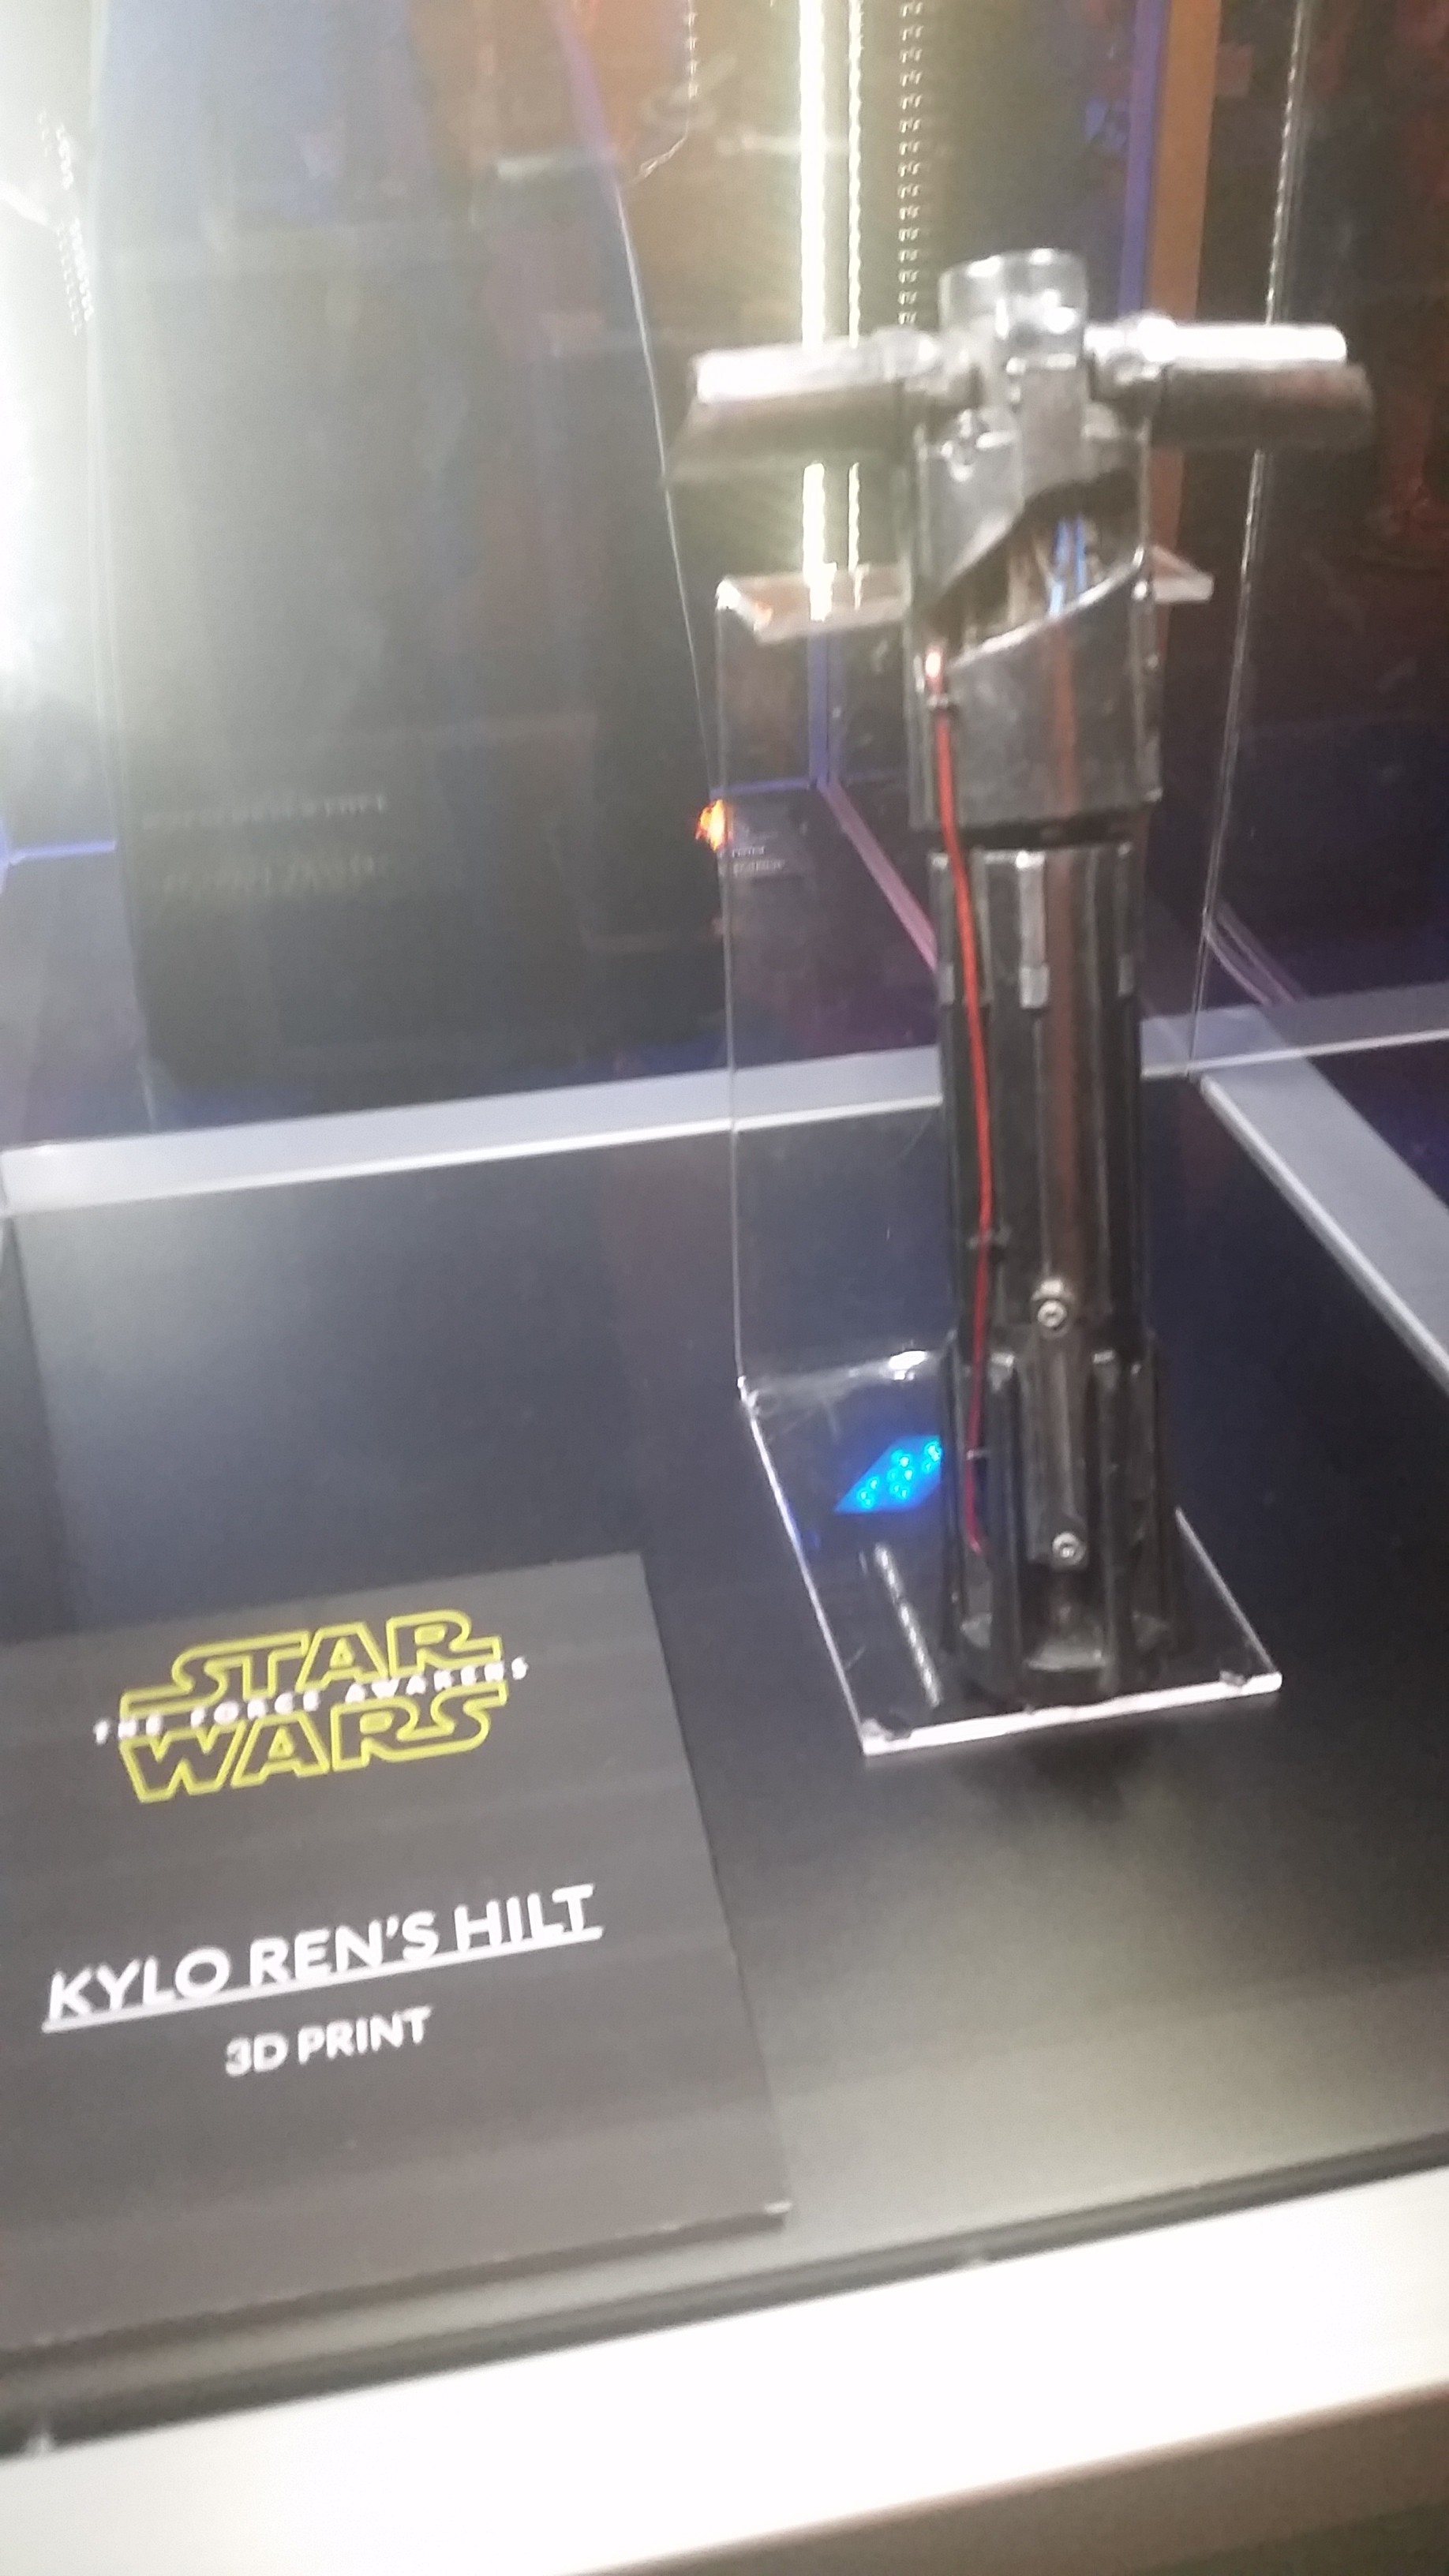 Fans Noted When That Trailer First Came Out Kylo Ren S Lightsaber